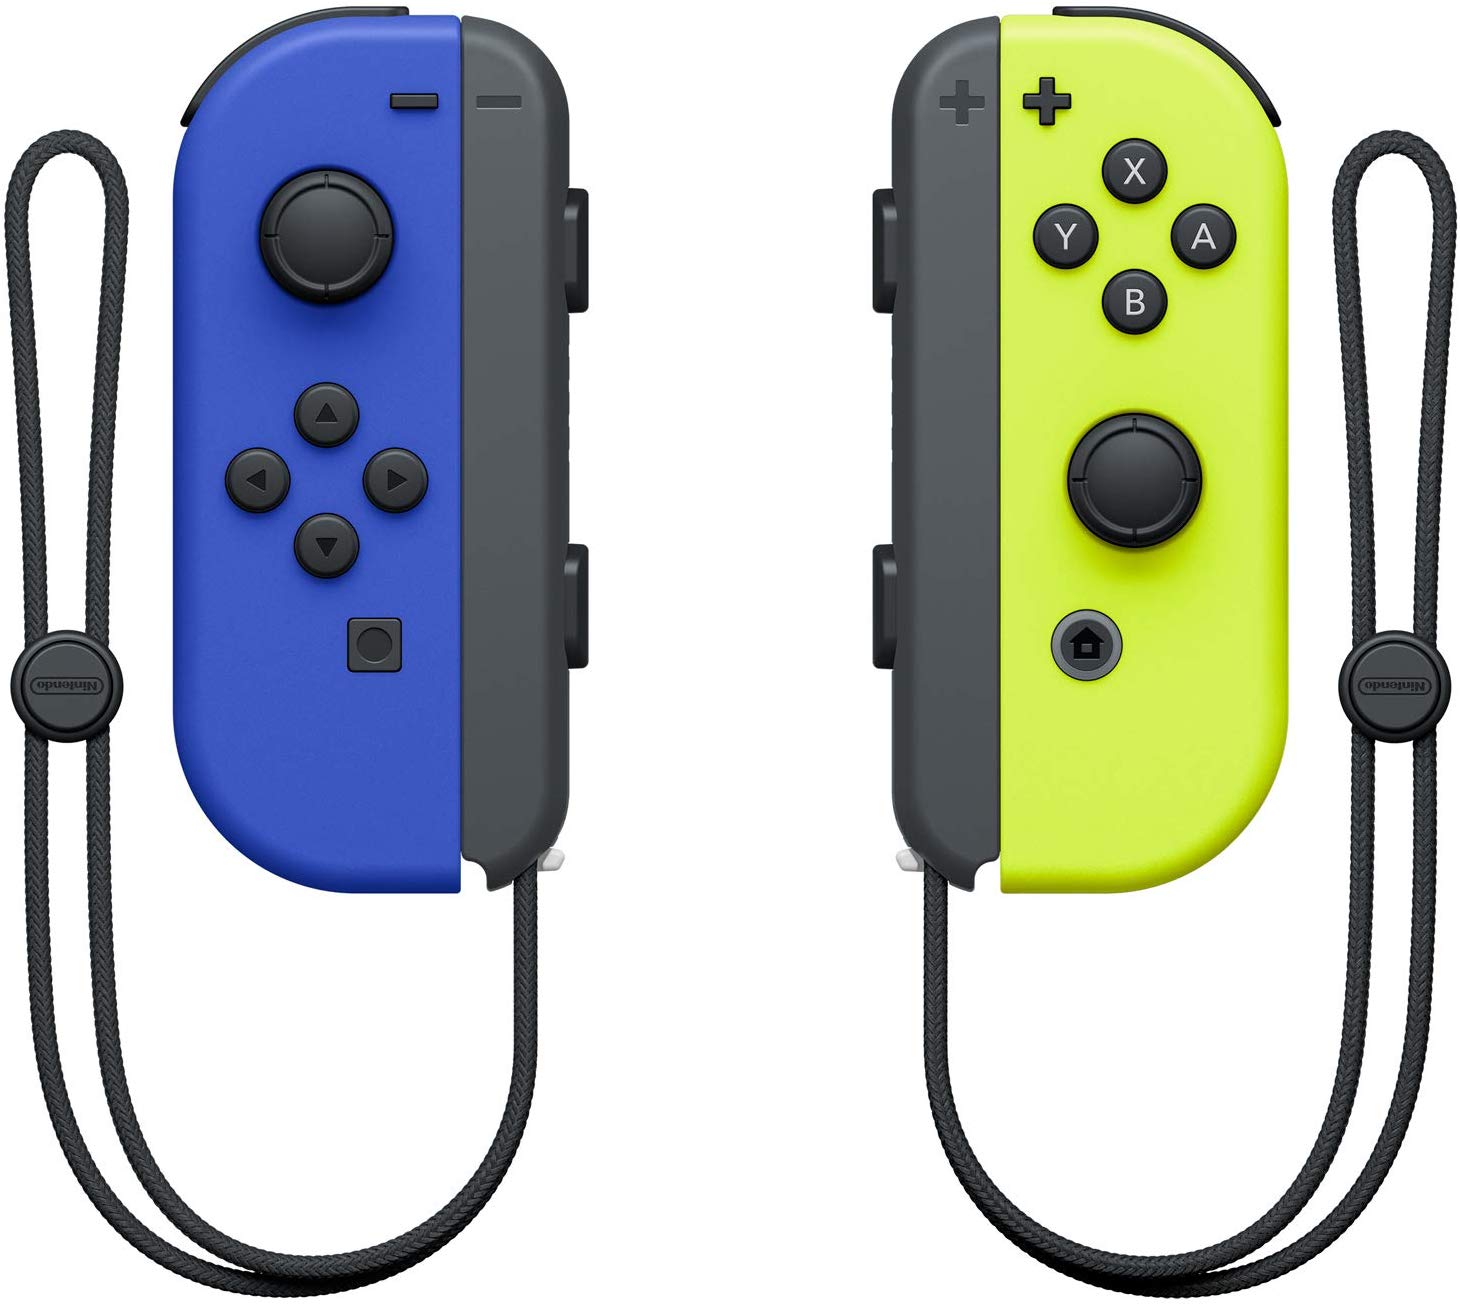 Blue and Neon Yellow Joy-Cons